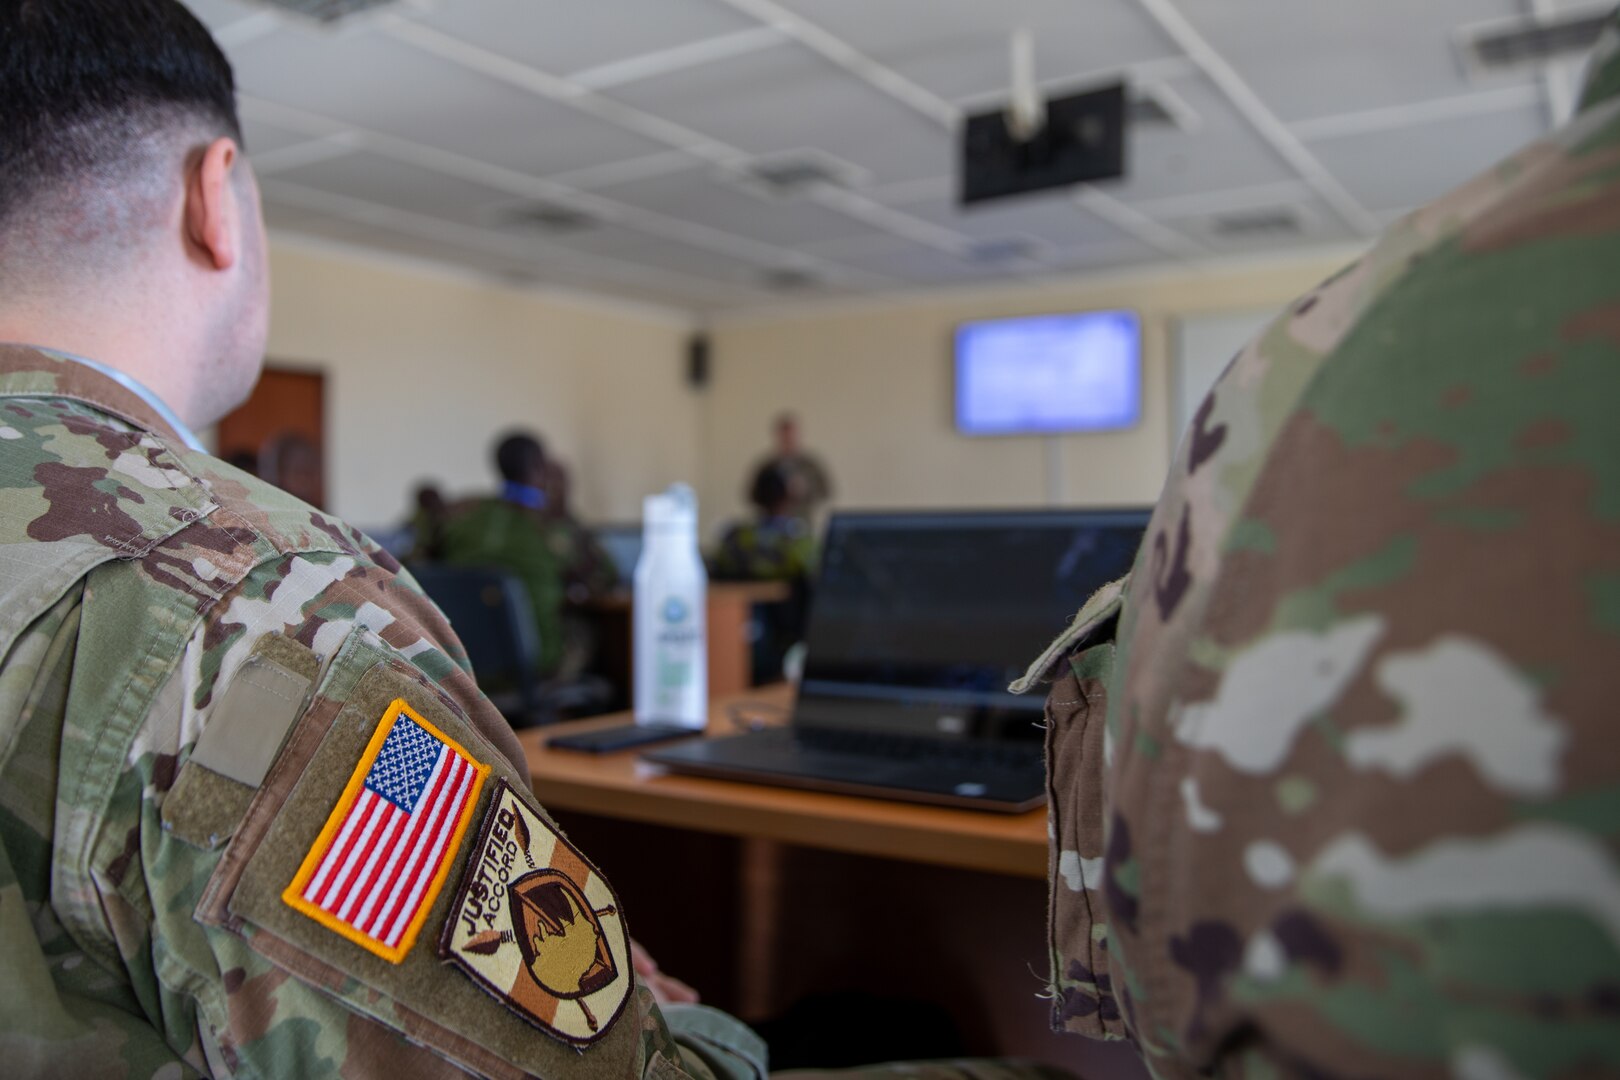 U.S. Army Illinois National Guard soldiers, with the 176th Cyber Protection Team, along with partner nations, attend the Cyber Awareness Course during exercise Justified Accord 23 (JA23) in Nairobi, Kenya, Feb. 21, 2023.